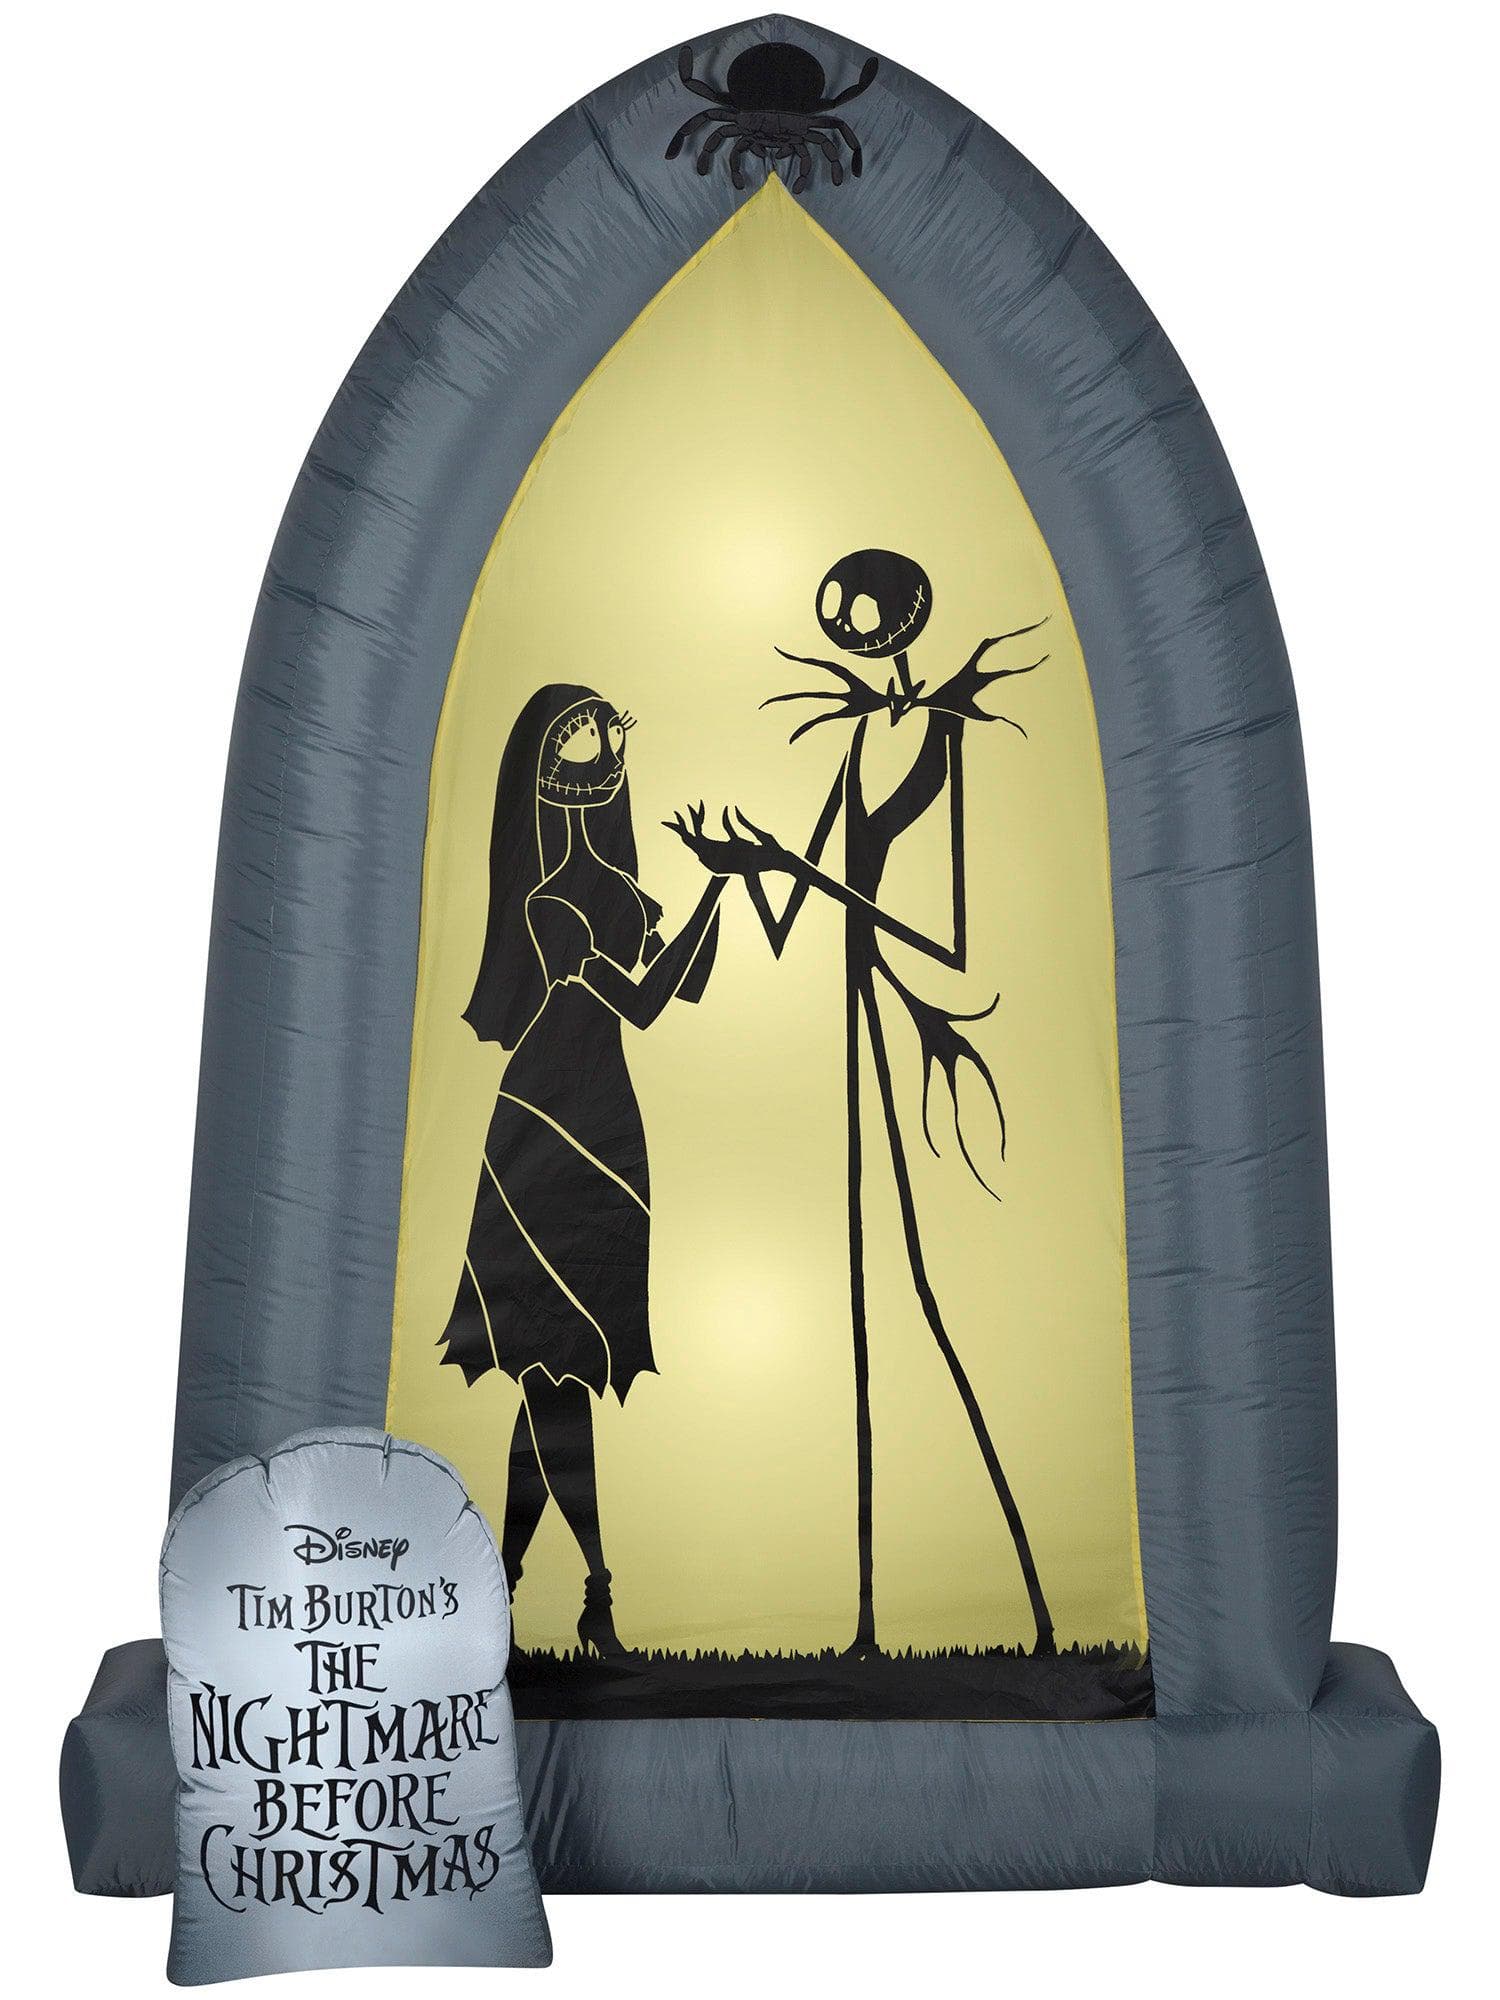 7 Foot The Nightmare Before Christmas Jack and Sally Silhouette Light Up Halloween Inflatable Lawn Decor - costumes.com